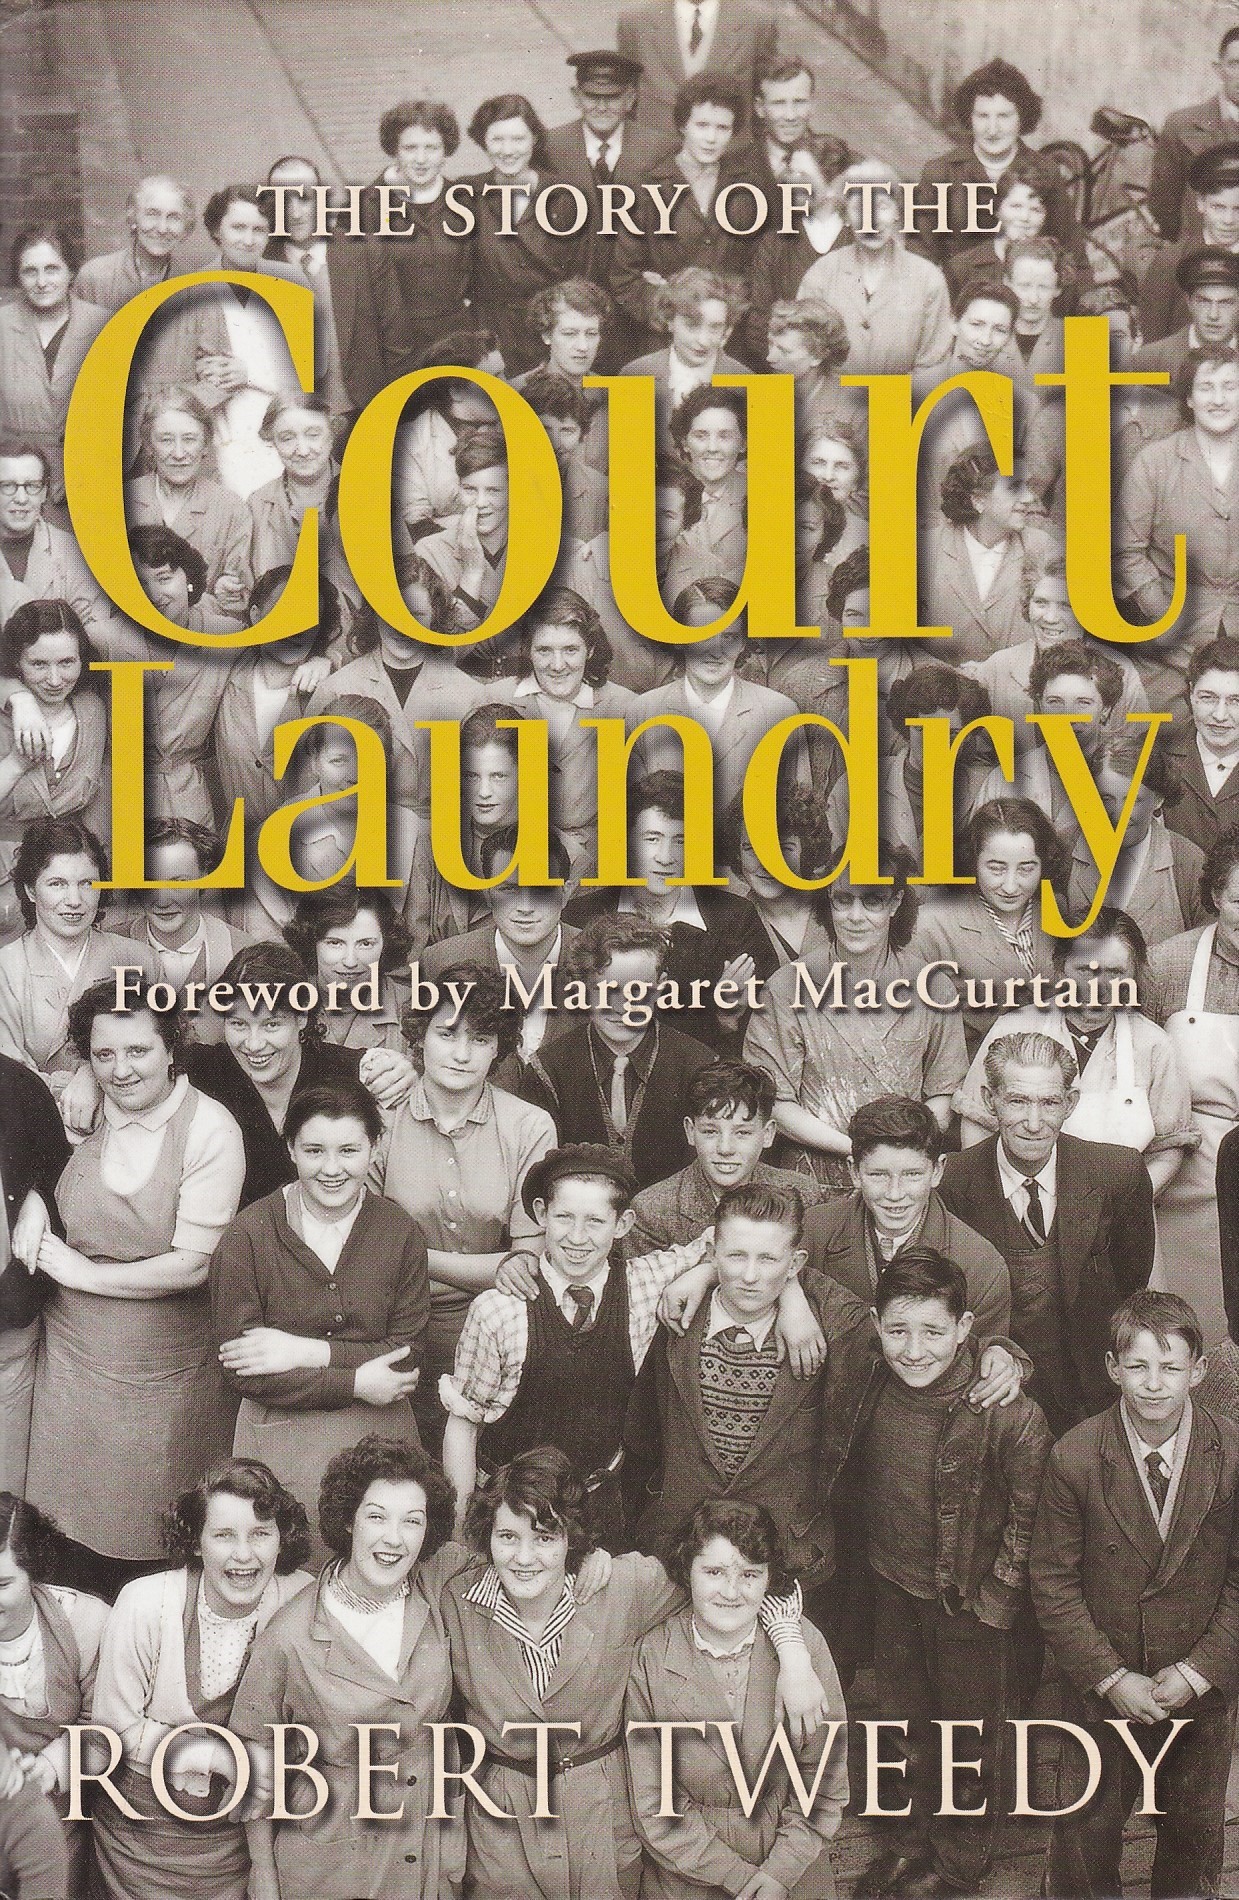 The Court Laundry by Robert Tweedy